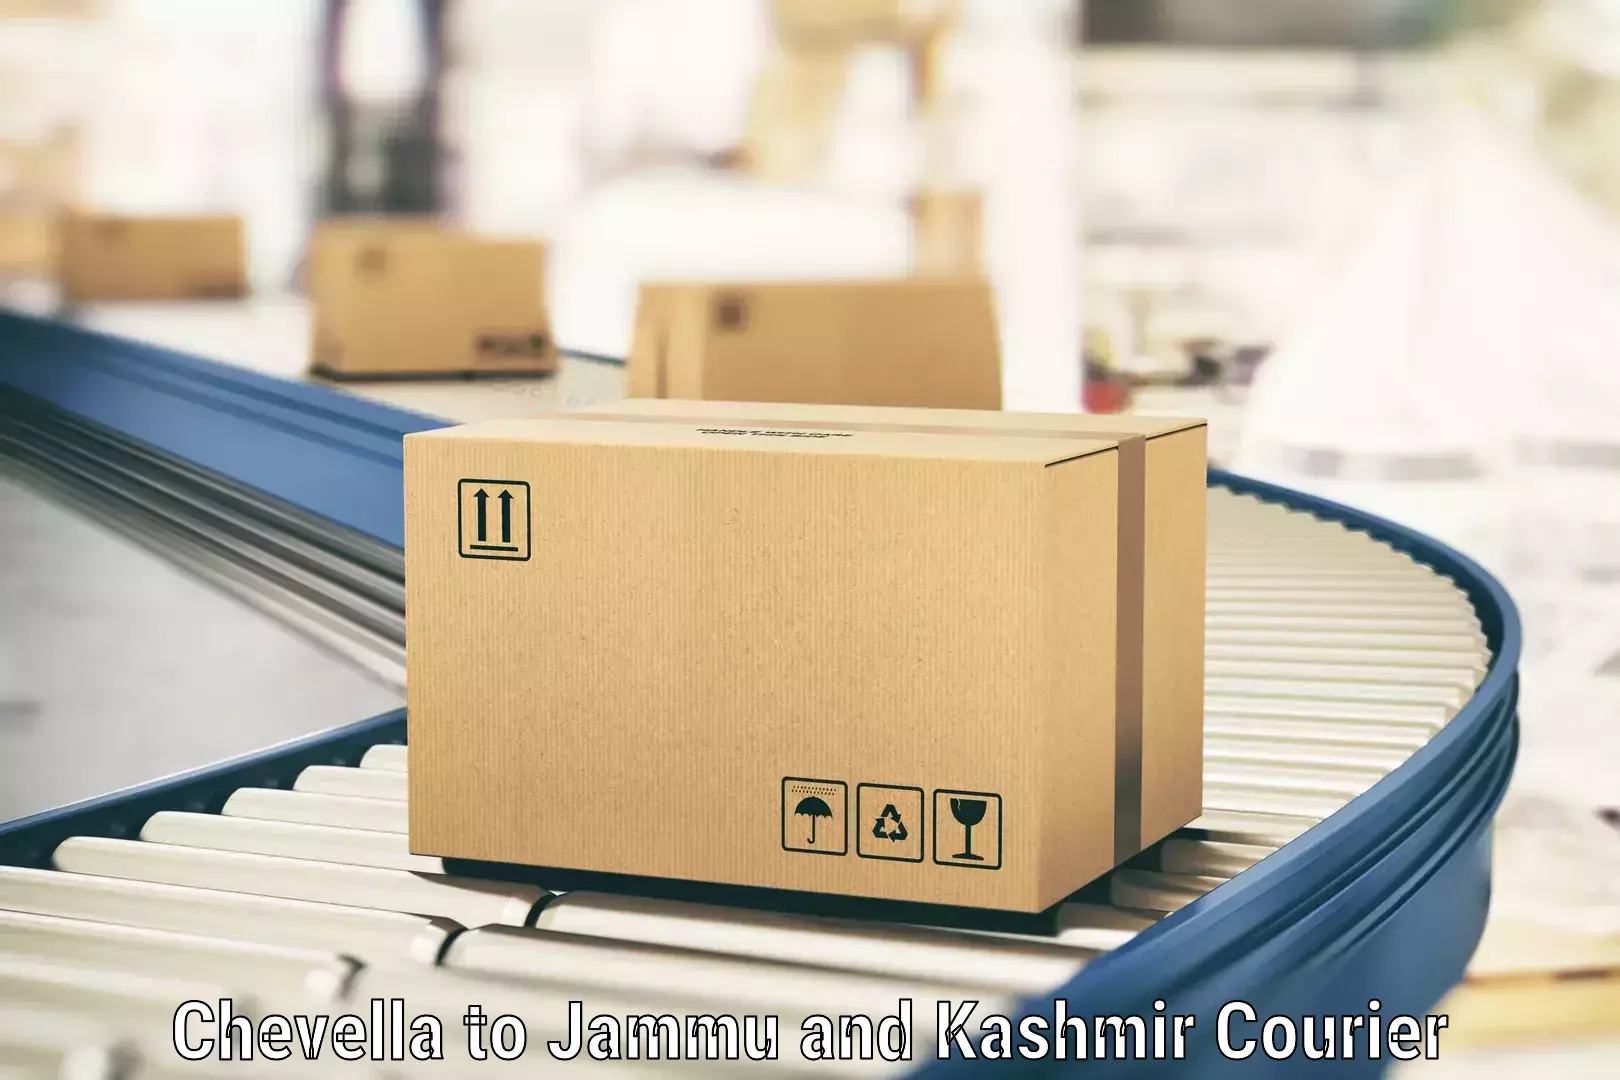 Nationwide parcel services Chevella to Udhampur